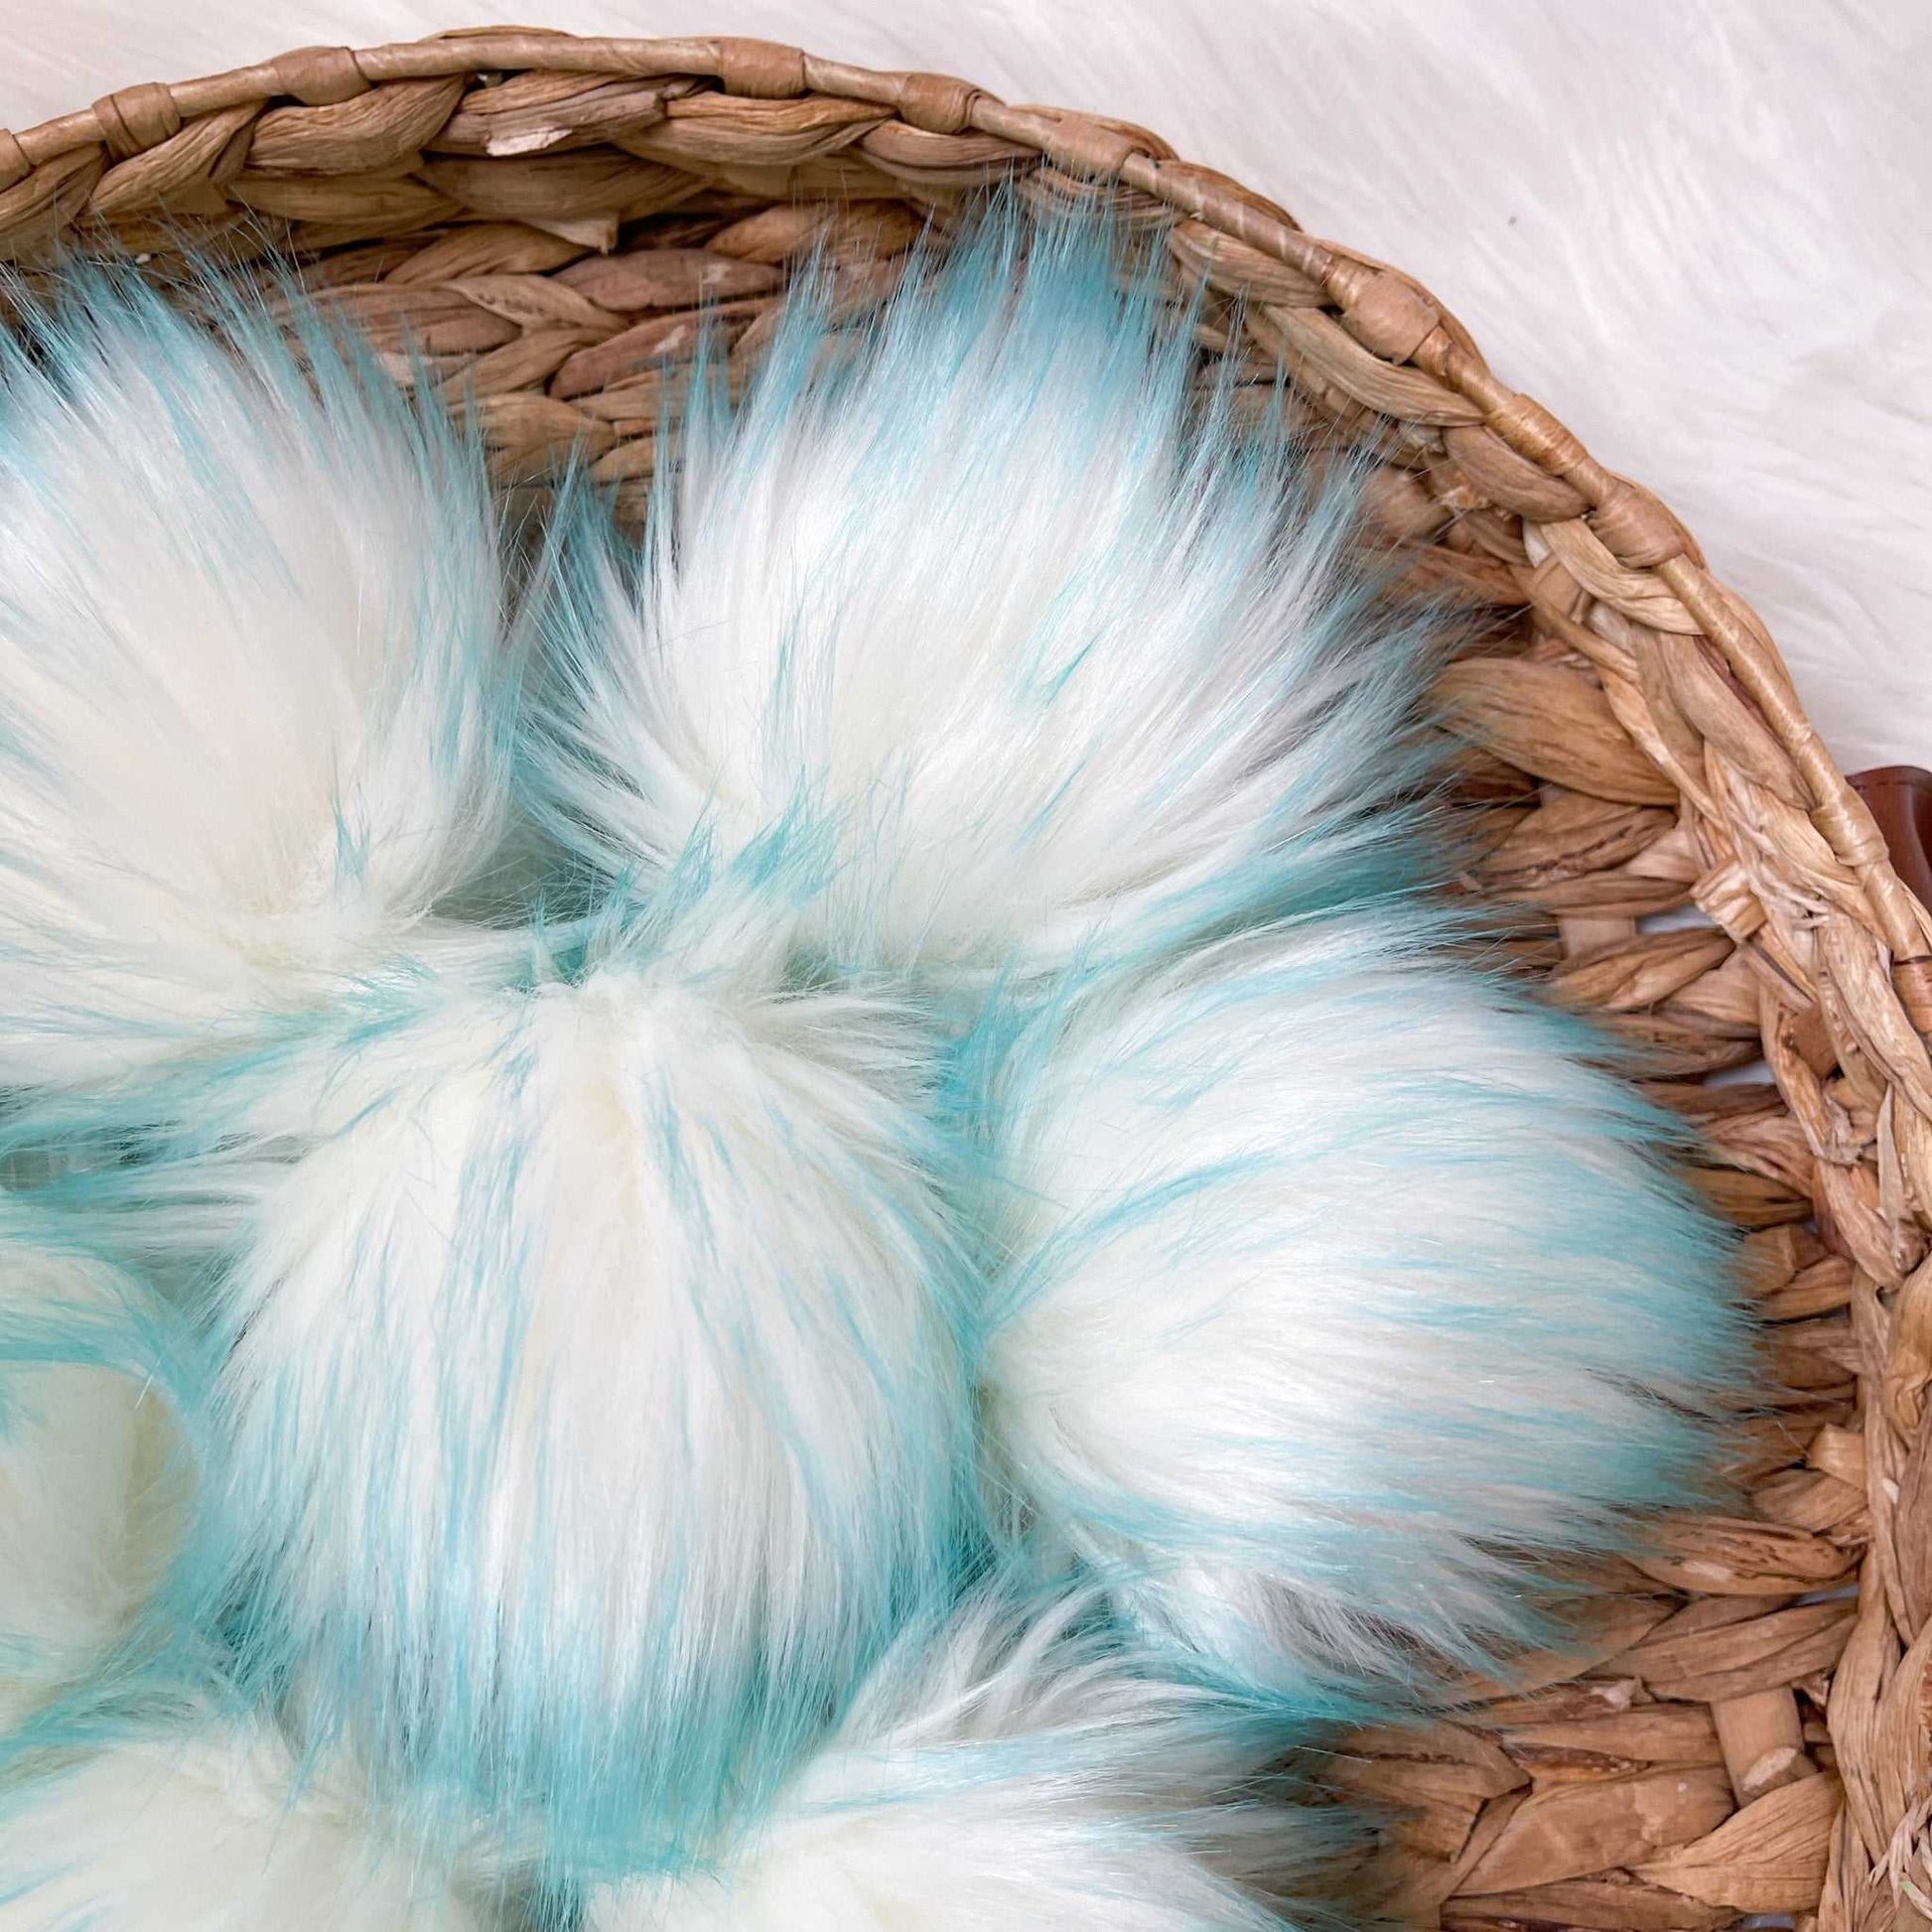 Aqua Faux Fur Fabric by the Yard or Meter | Teal Pompom Fur, Arts & Crafts, Decor, Costume Faux Fur Fabric 4 $ Buttons & Beans Co.